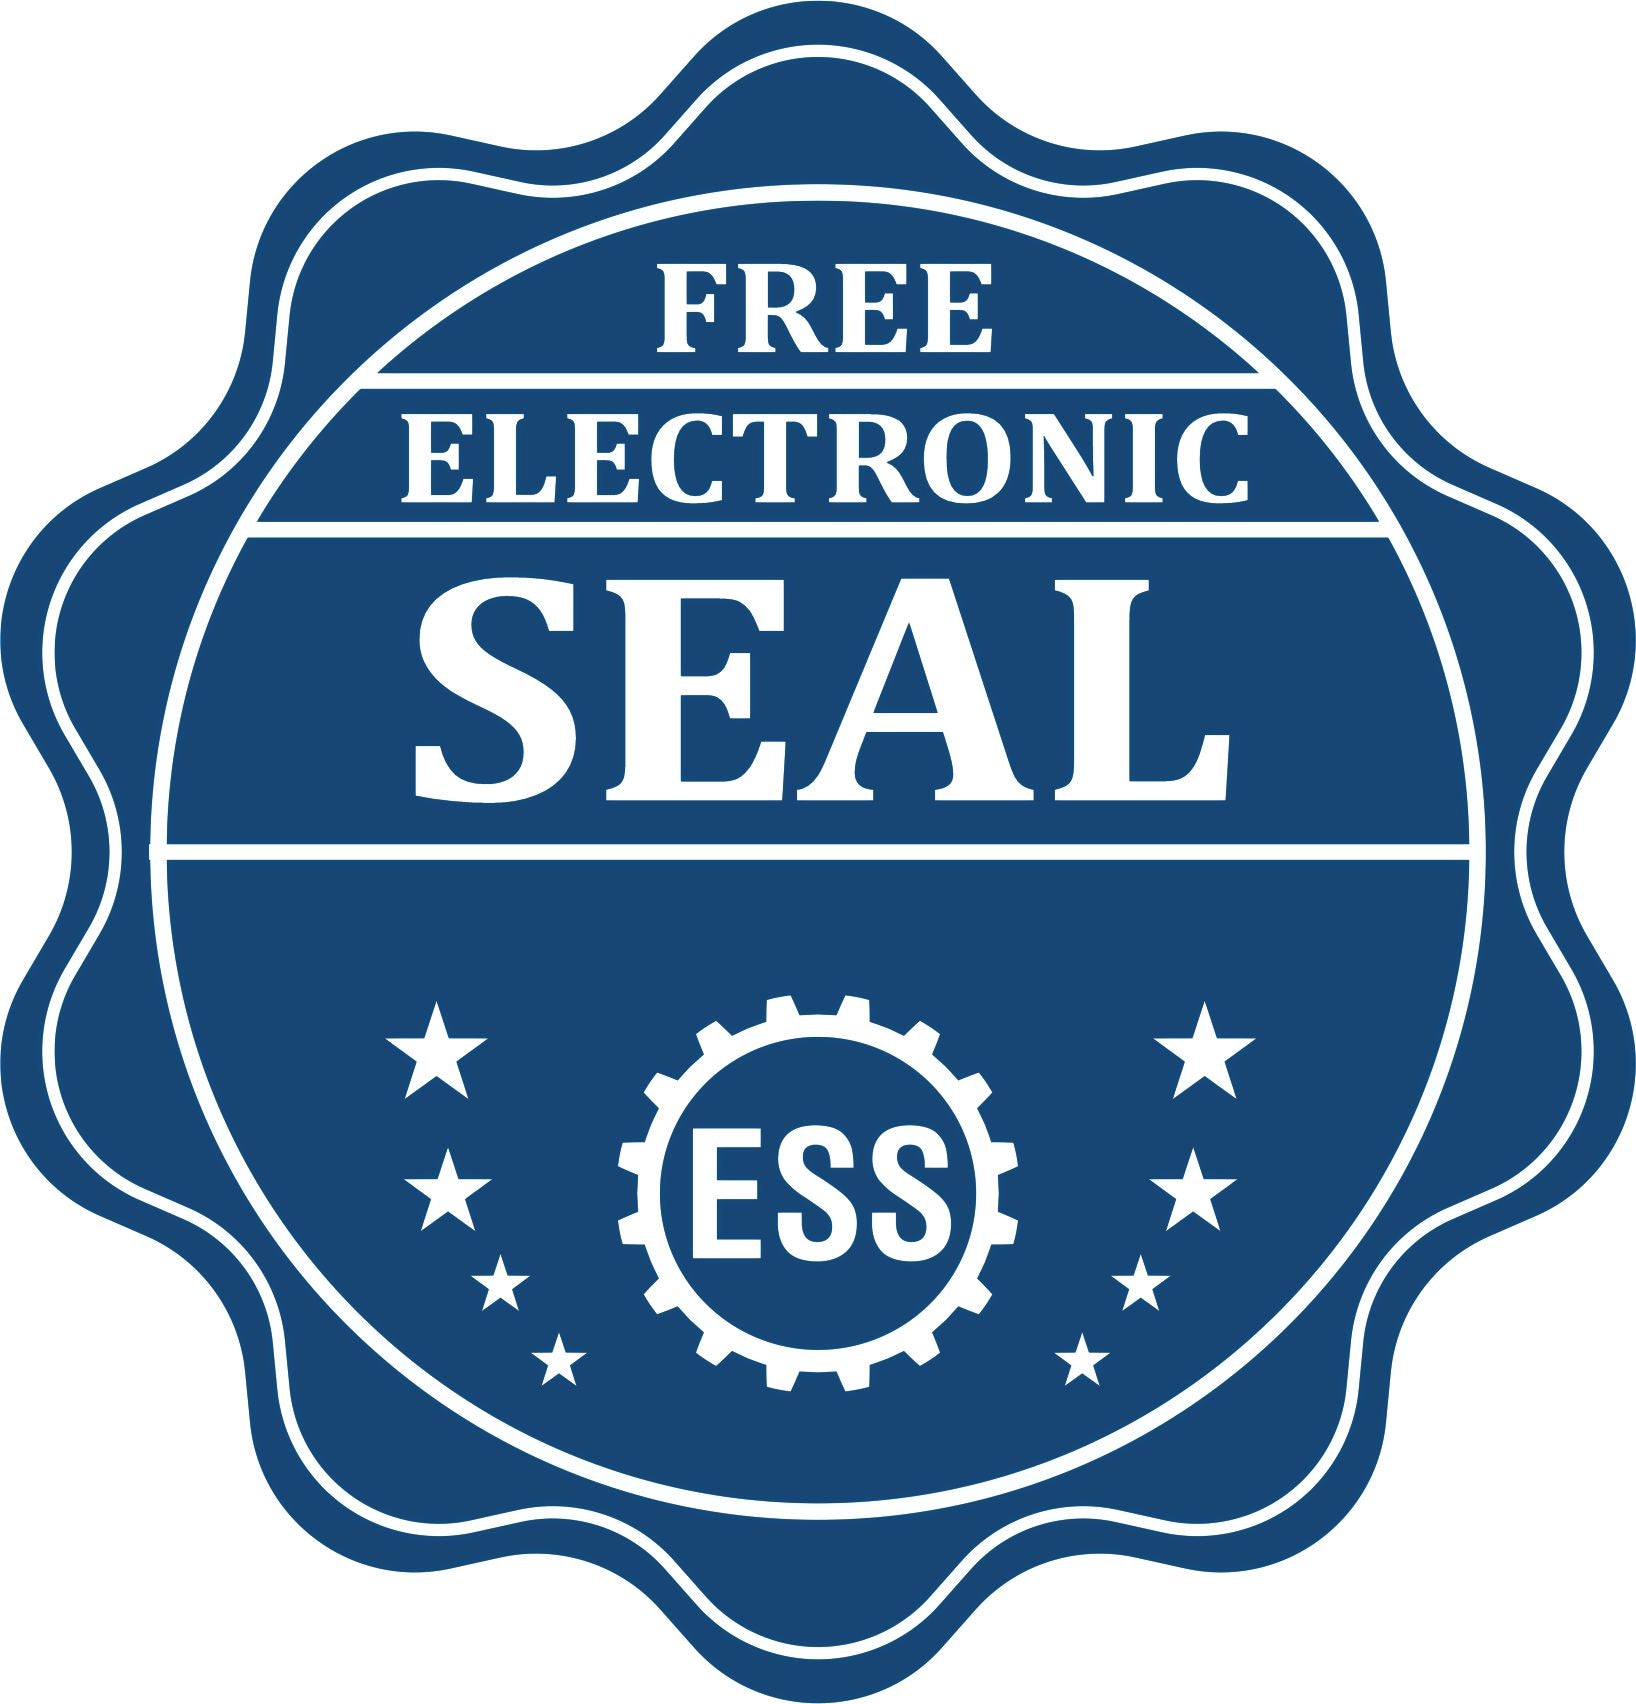 A badge showing a free electronic seal for the Hybrid Mississippi Architect Seal with stars and the ESS gear on the emblem.